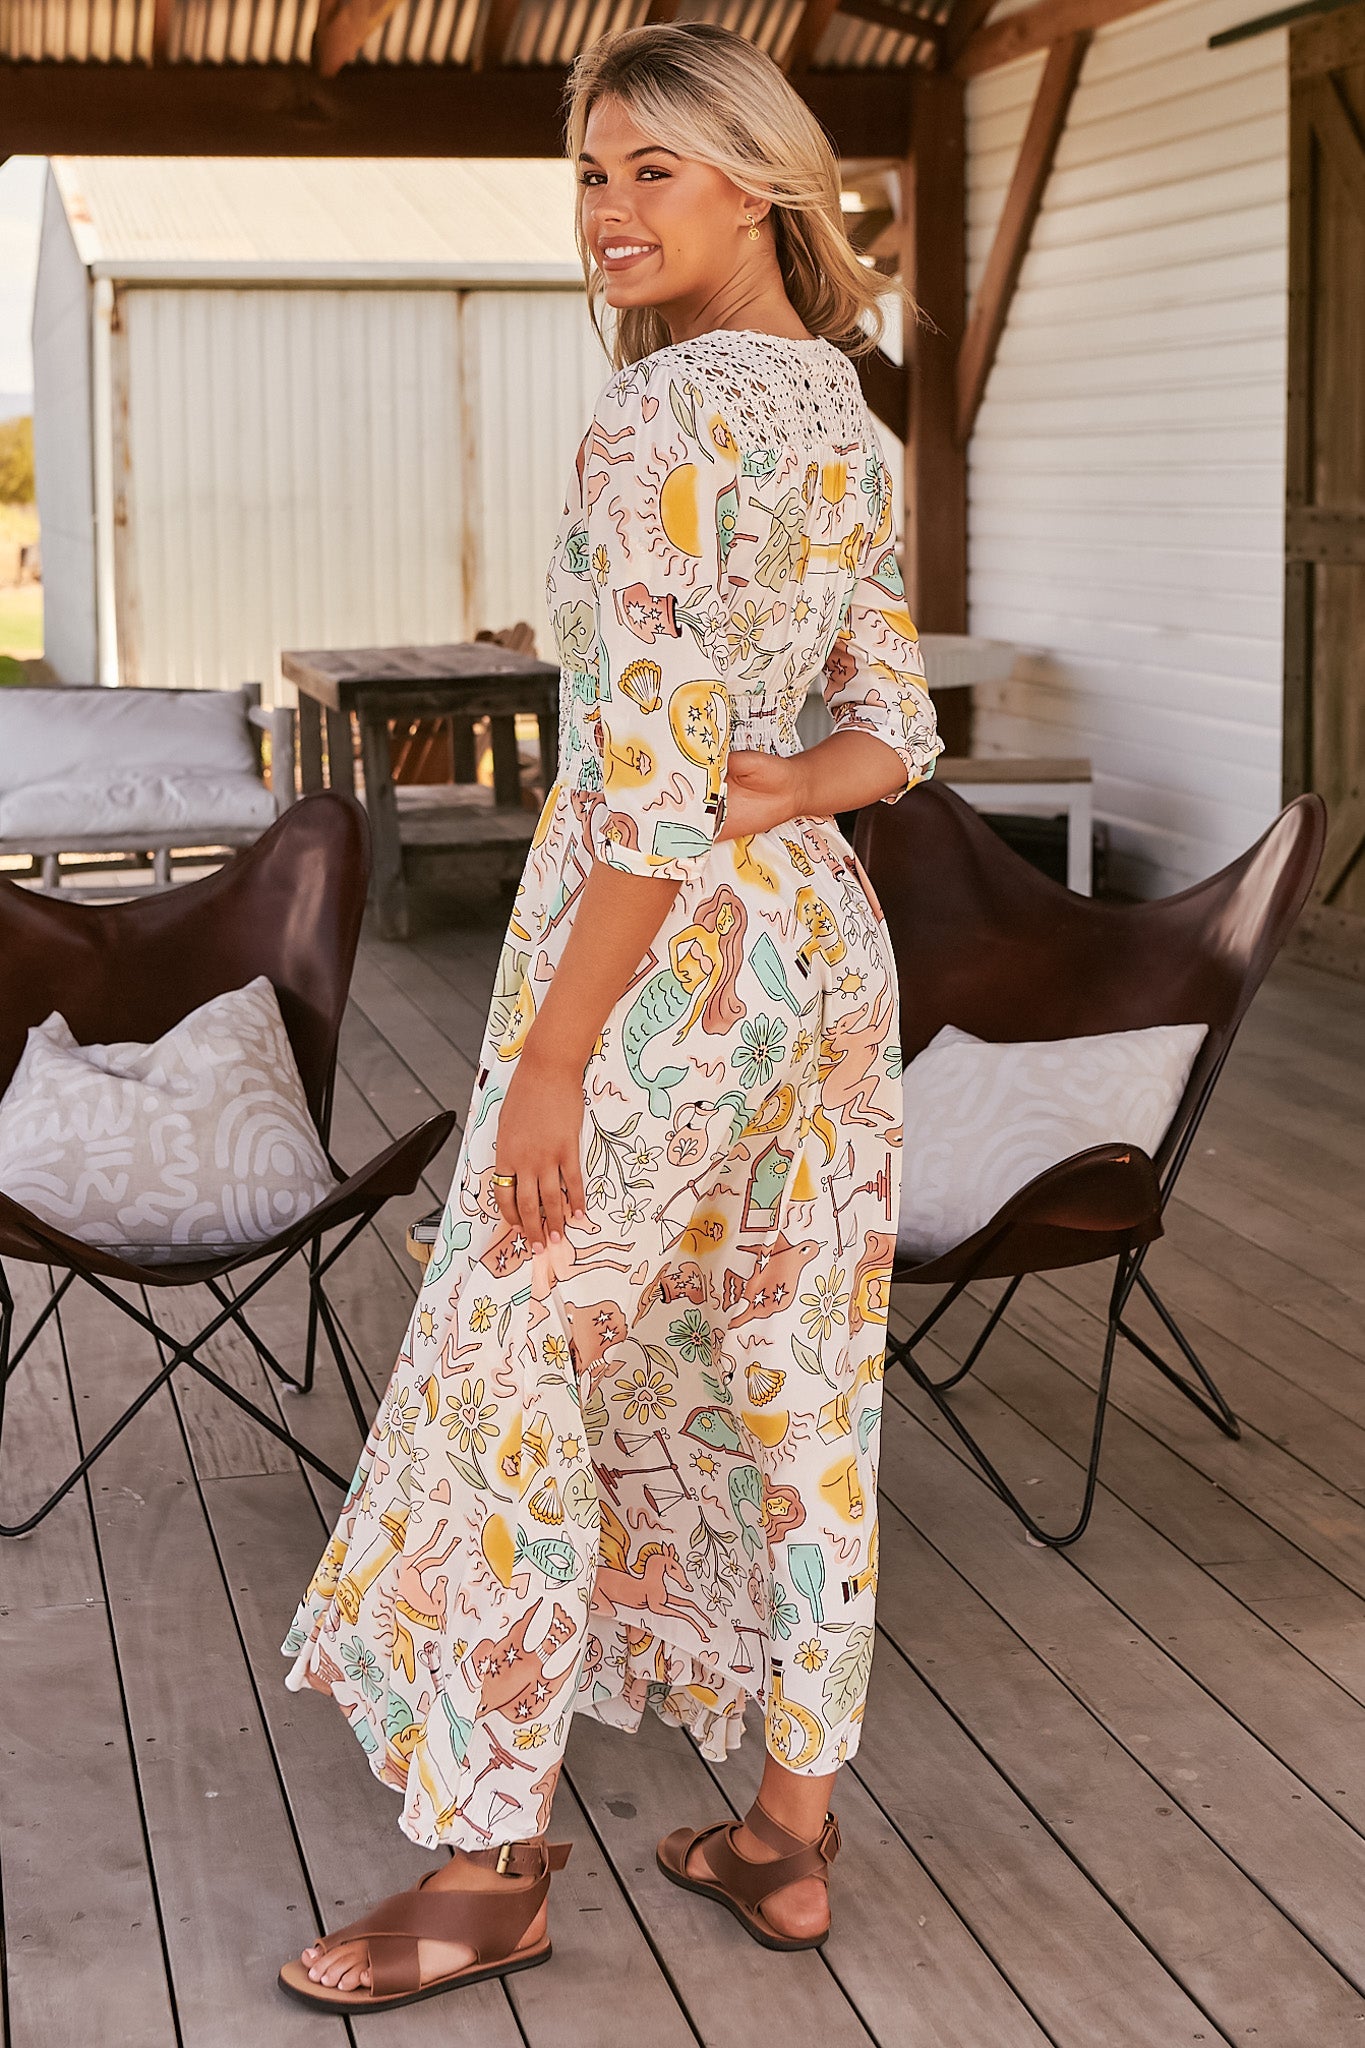 JAASE - Indiana Maxi Dress: Lace Back Shirred Waist A Line Dress with Handkercheif Hemline in Fantasy Print